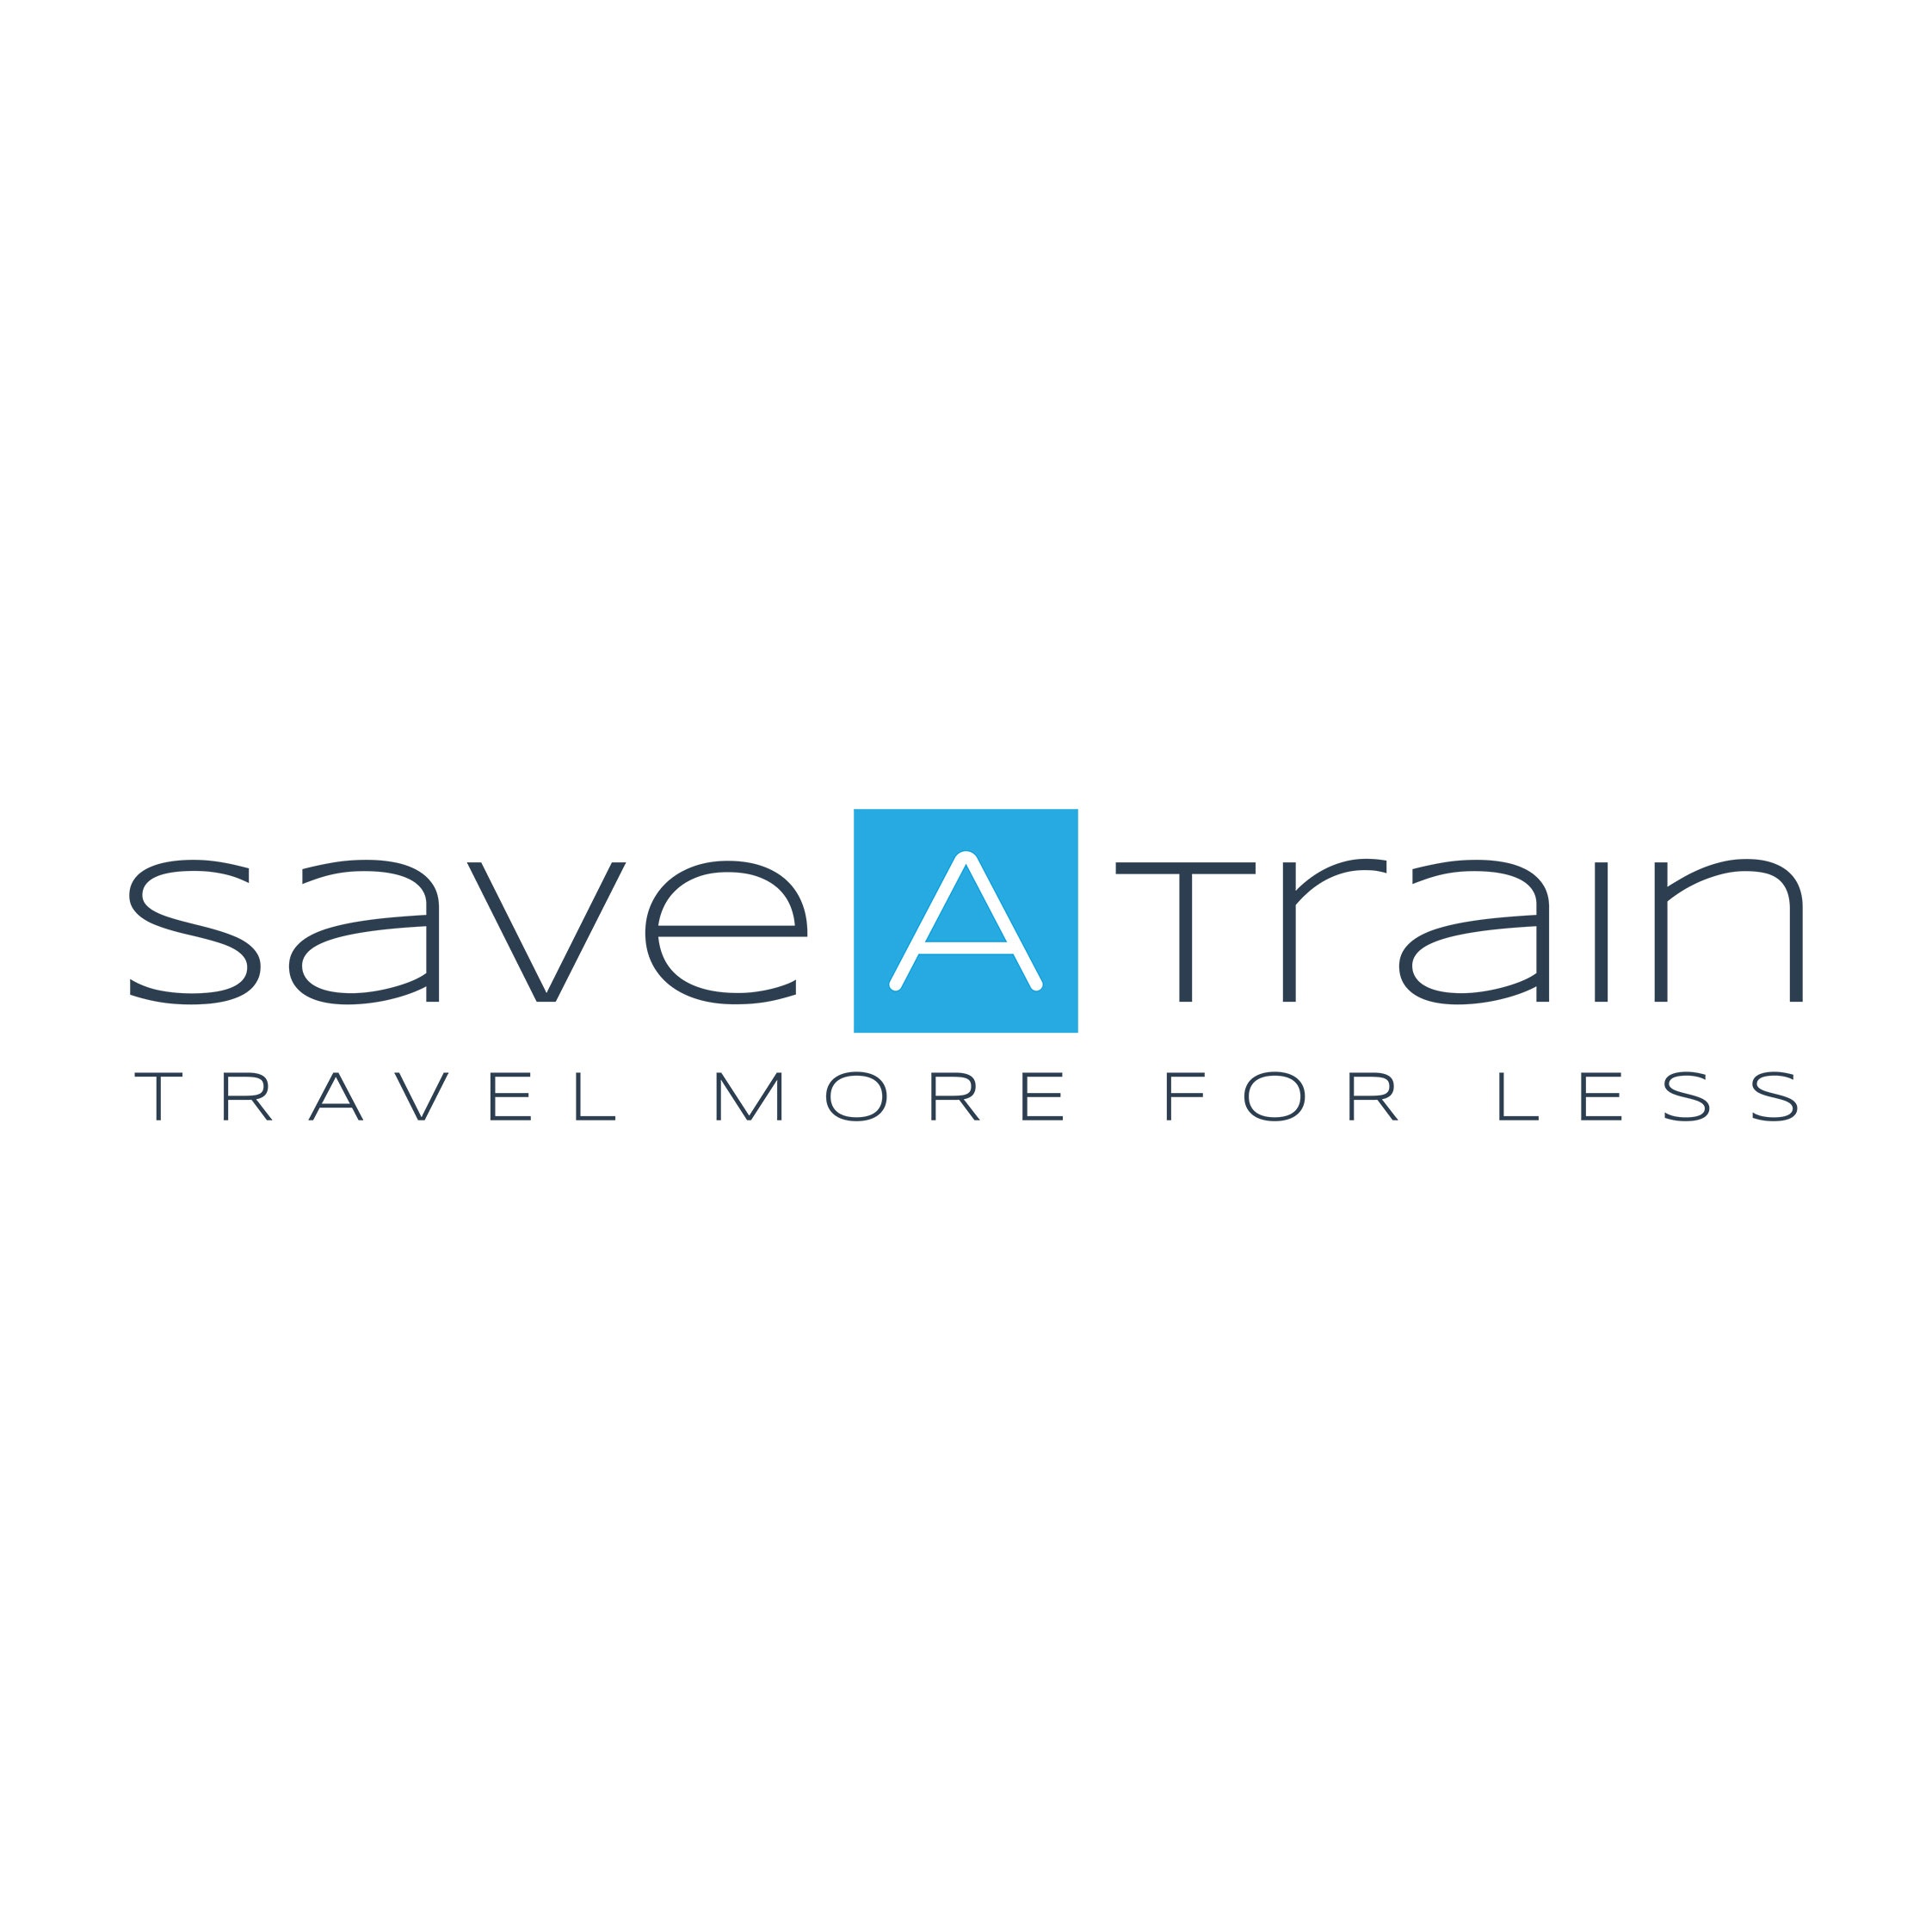 About Save A Train